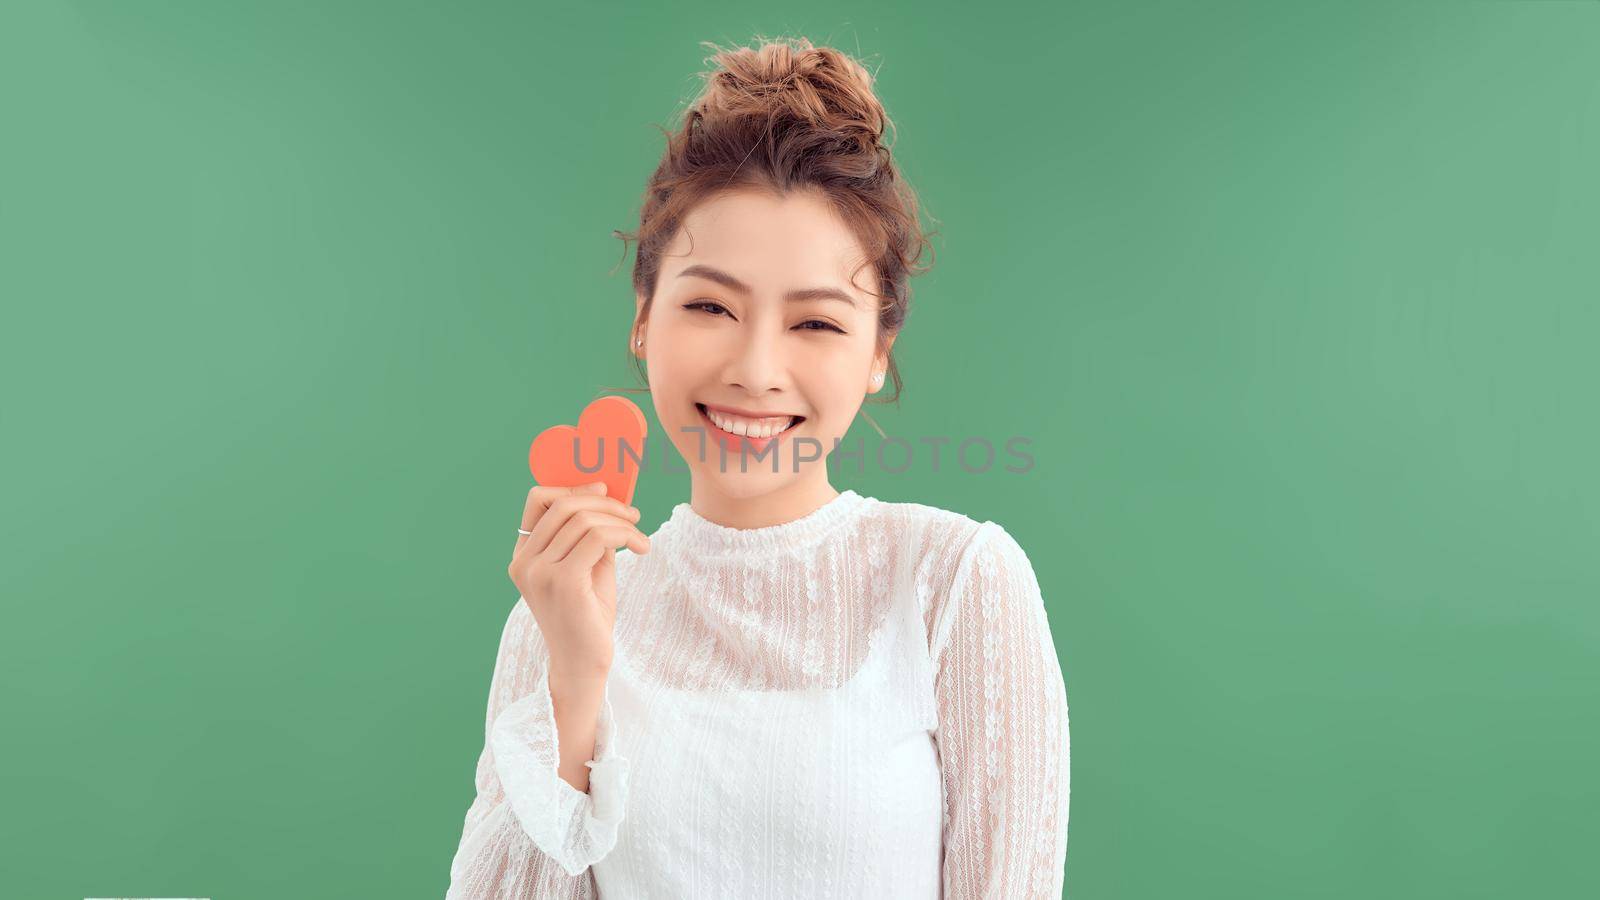 Beautiful asian girl with a heart, Valentine's Day, isolated on green background